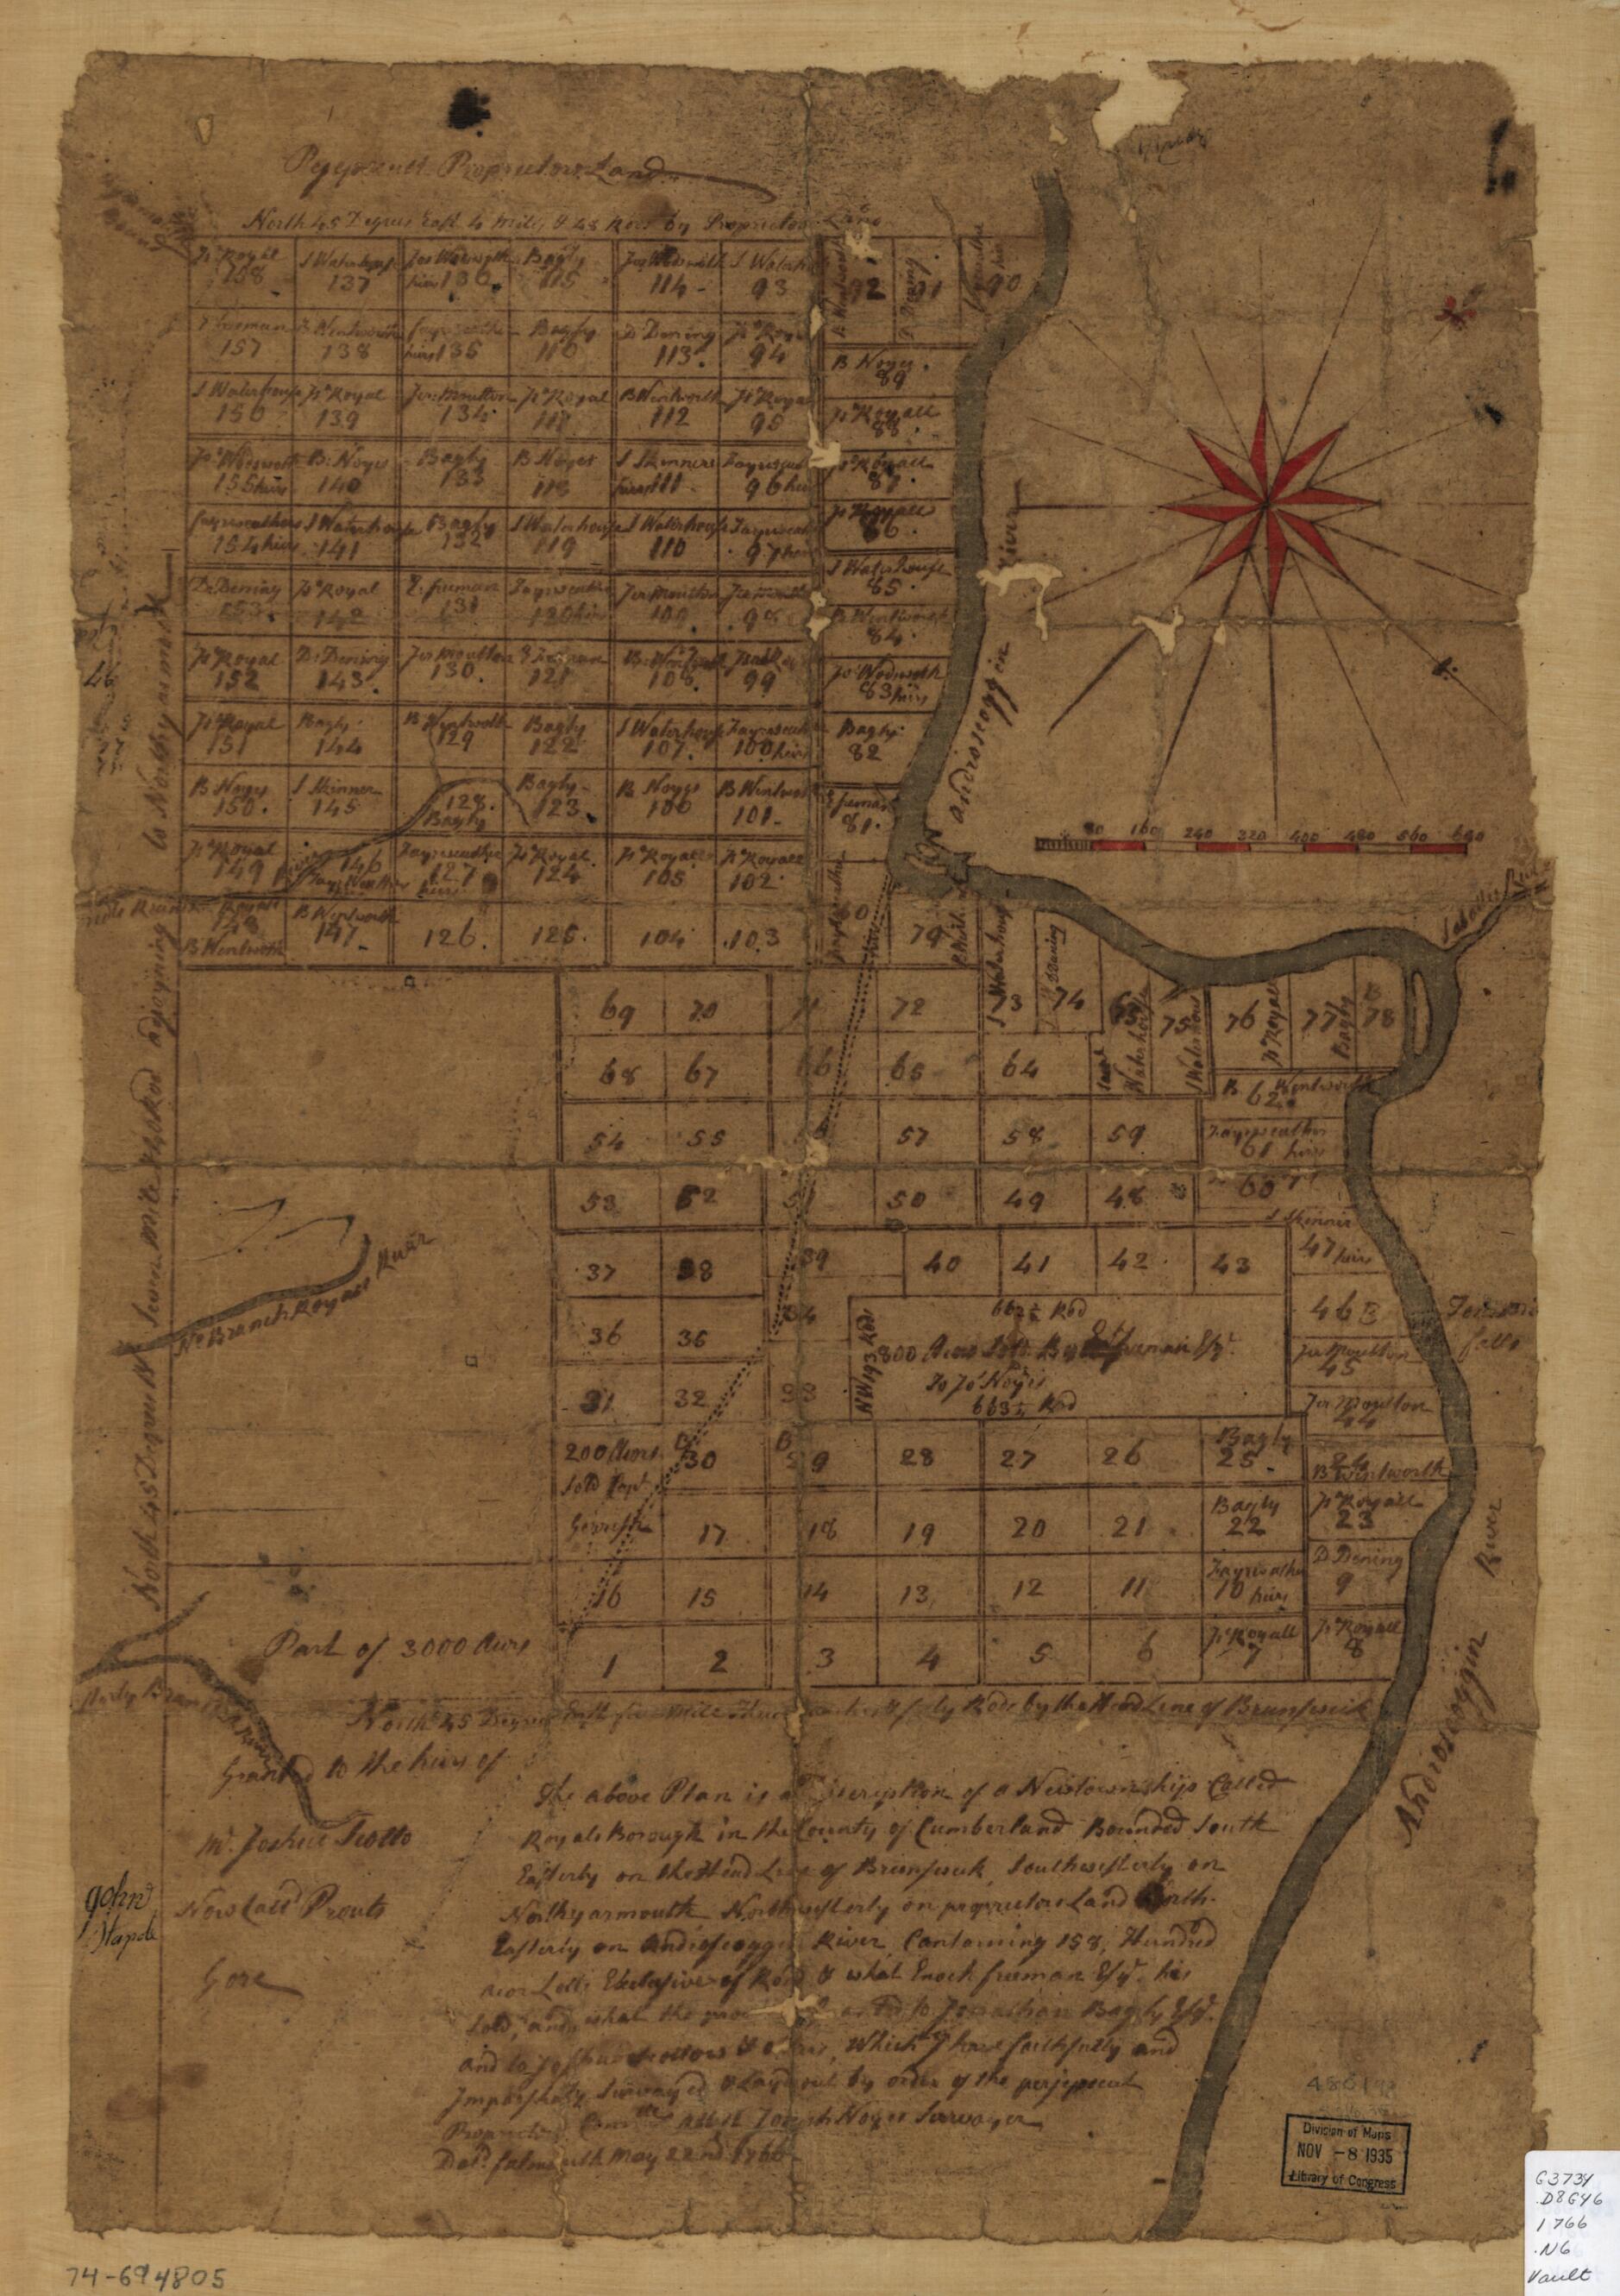 This old map of The Above Plan Is a Discription of a New Township Called Royalsborough In the County of Cumberland, Bounded Southeasterly On the Headline of Brunswick, Southwesterly On Northyarmouth, Northwesterly On Proprietors Land, Northeasterly On An